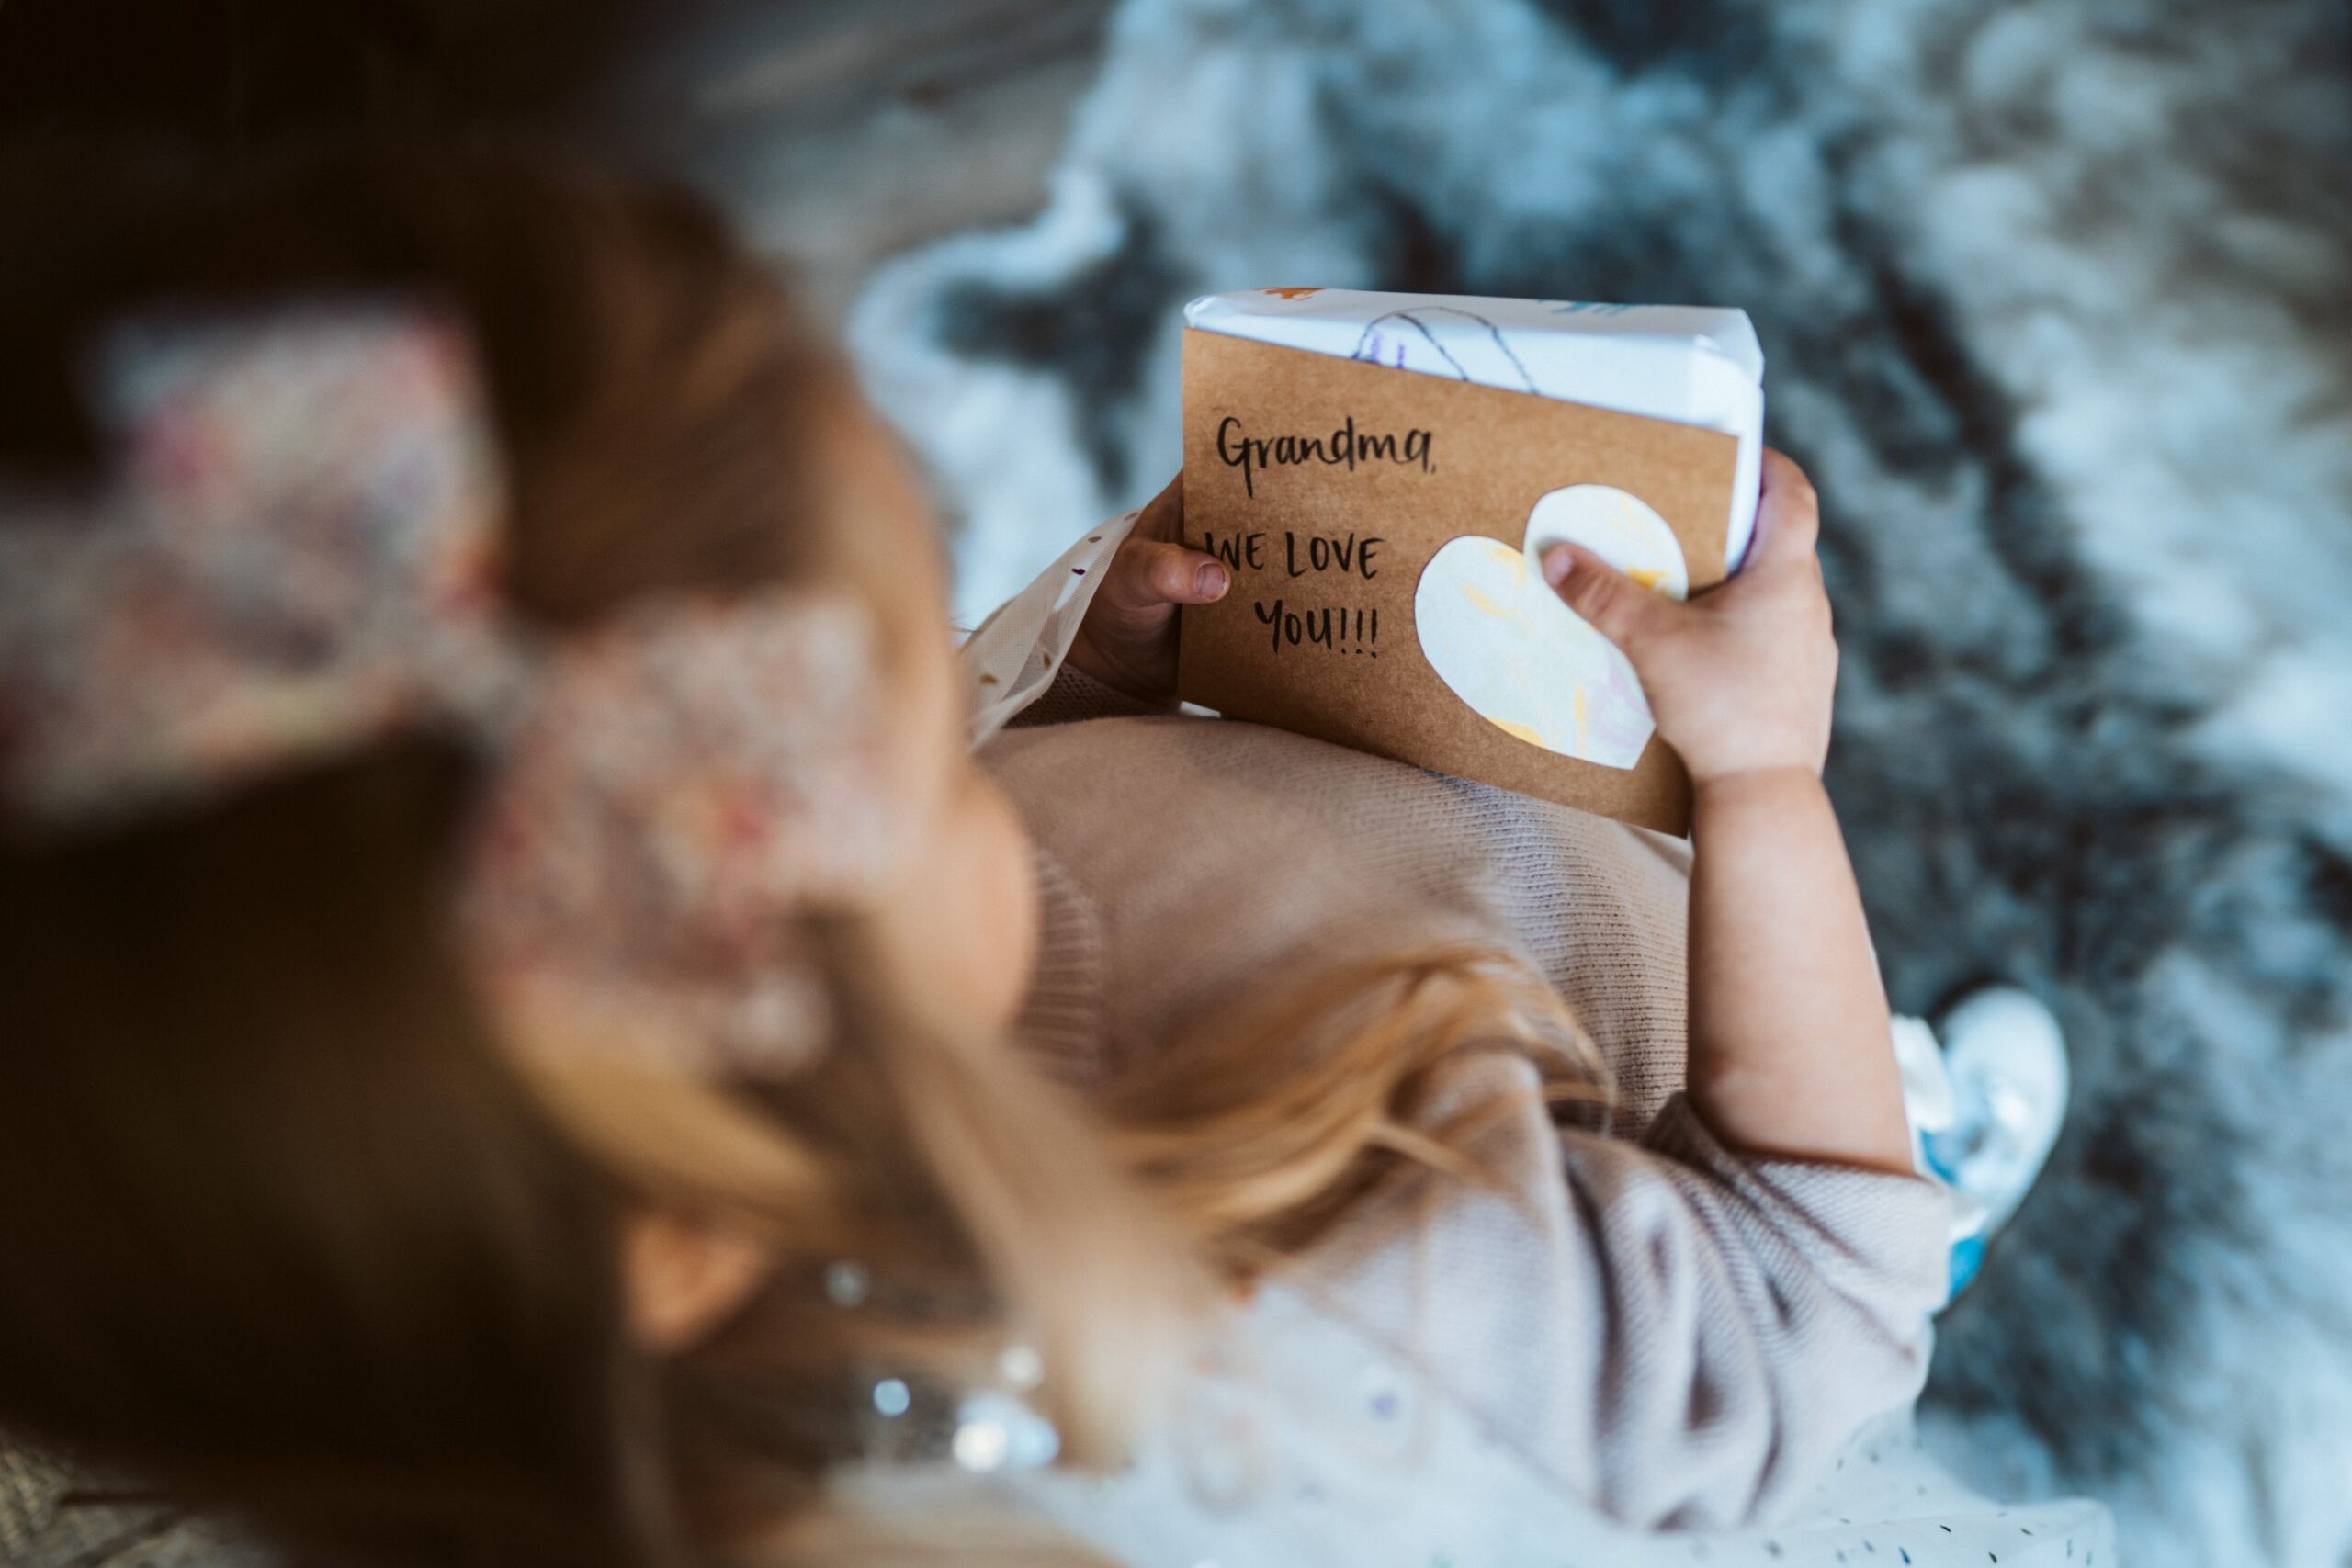 A girl hosing a small present with a brown label with "Grandma we love you!" written on it